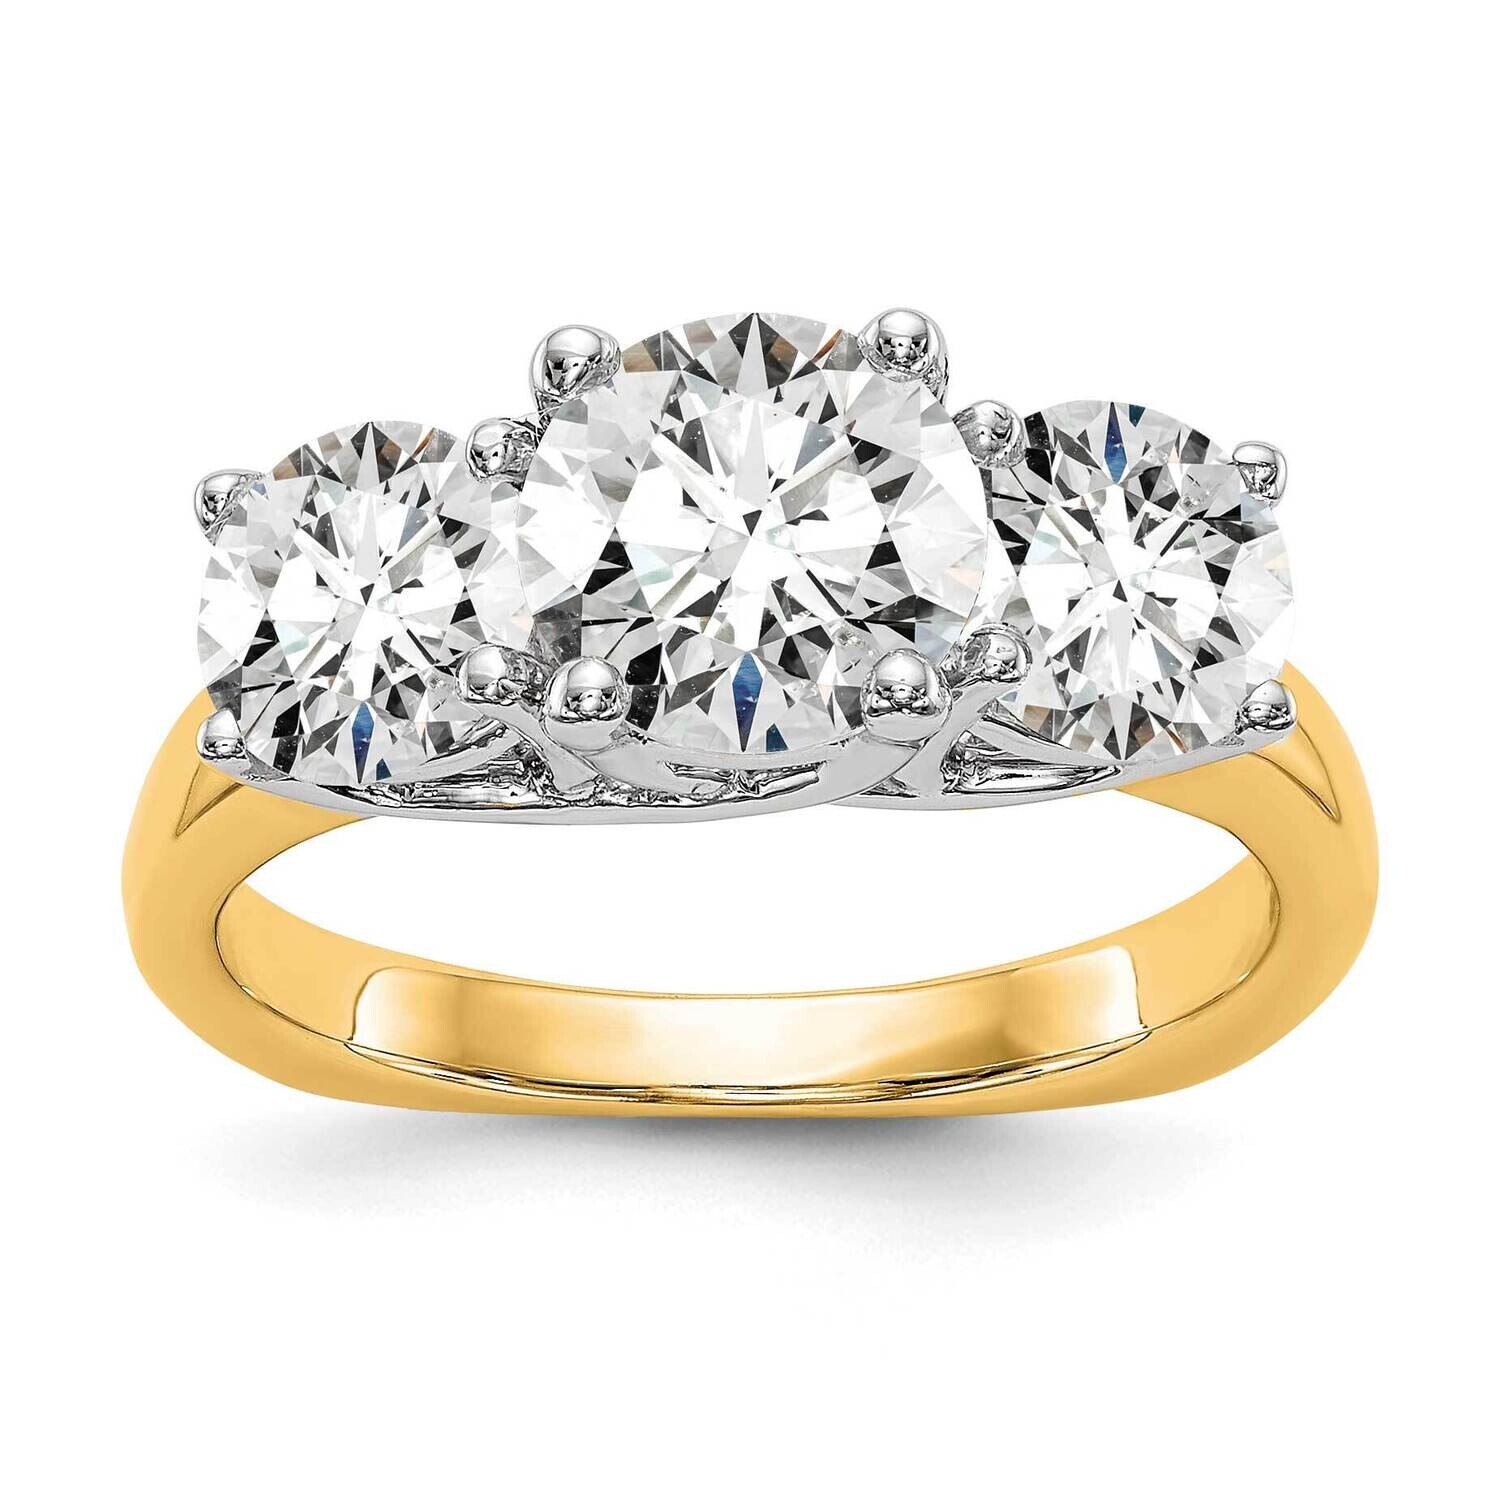 3-Stone Holds 1 Carat 6.5mm Round Center 2-5.00mm Round Sides Engagement Ring Mounting 14k Two-Tone Gold RM2953E-100_100-YWAA